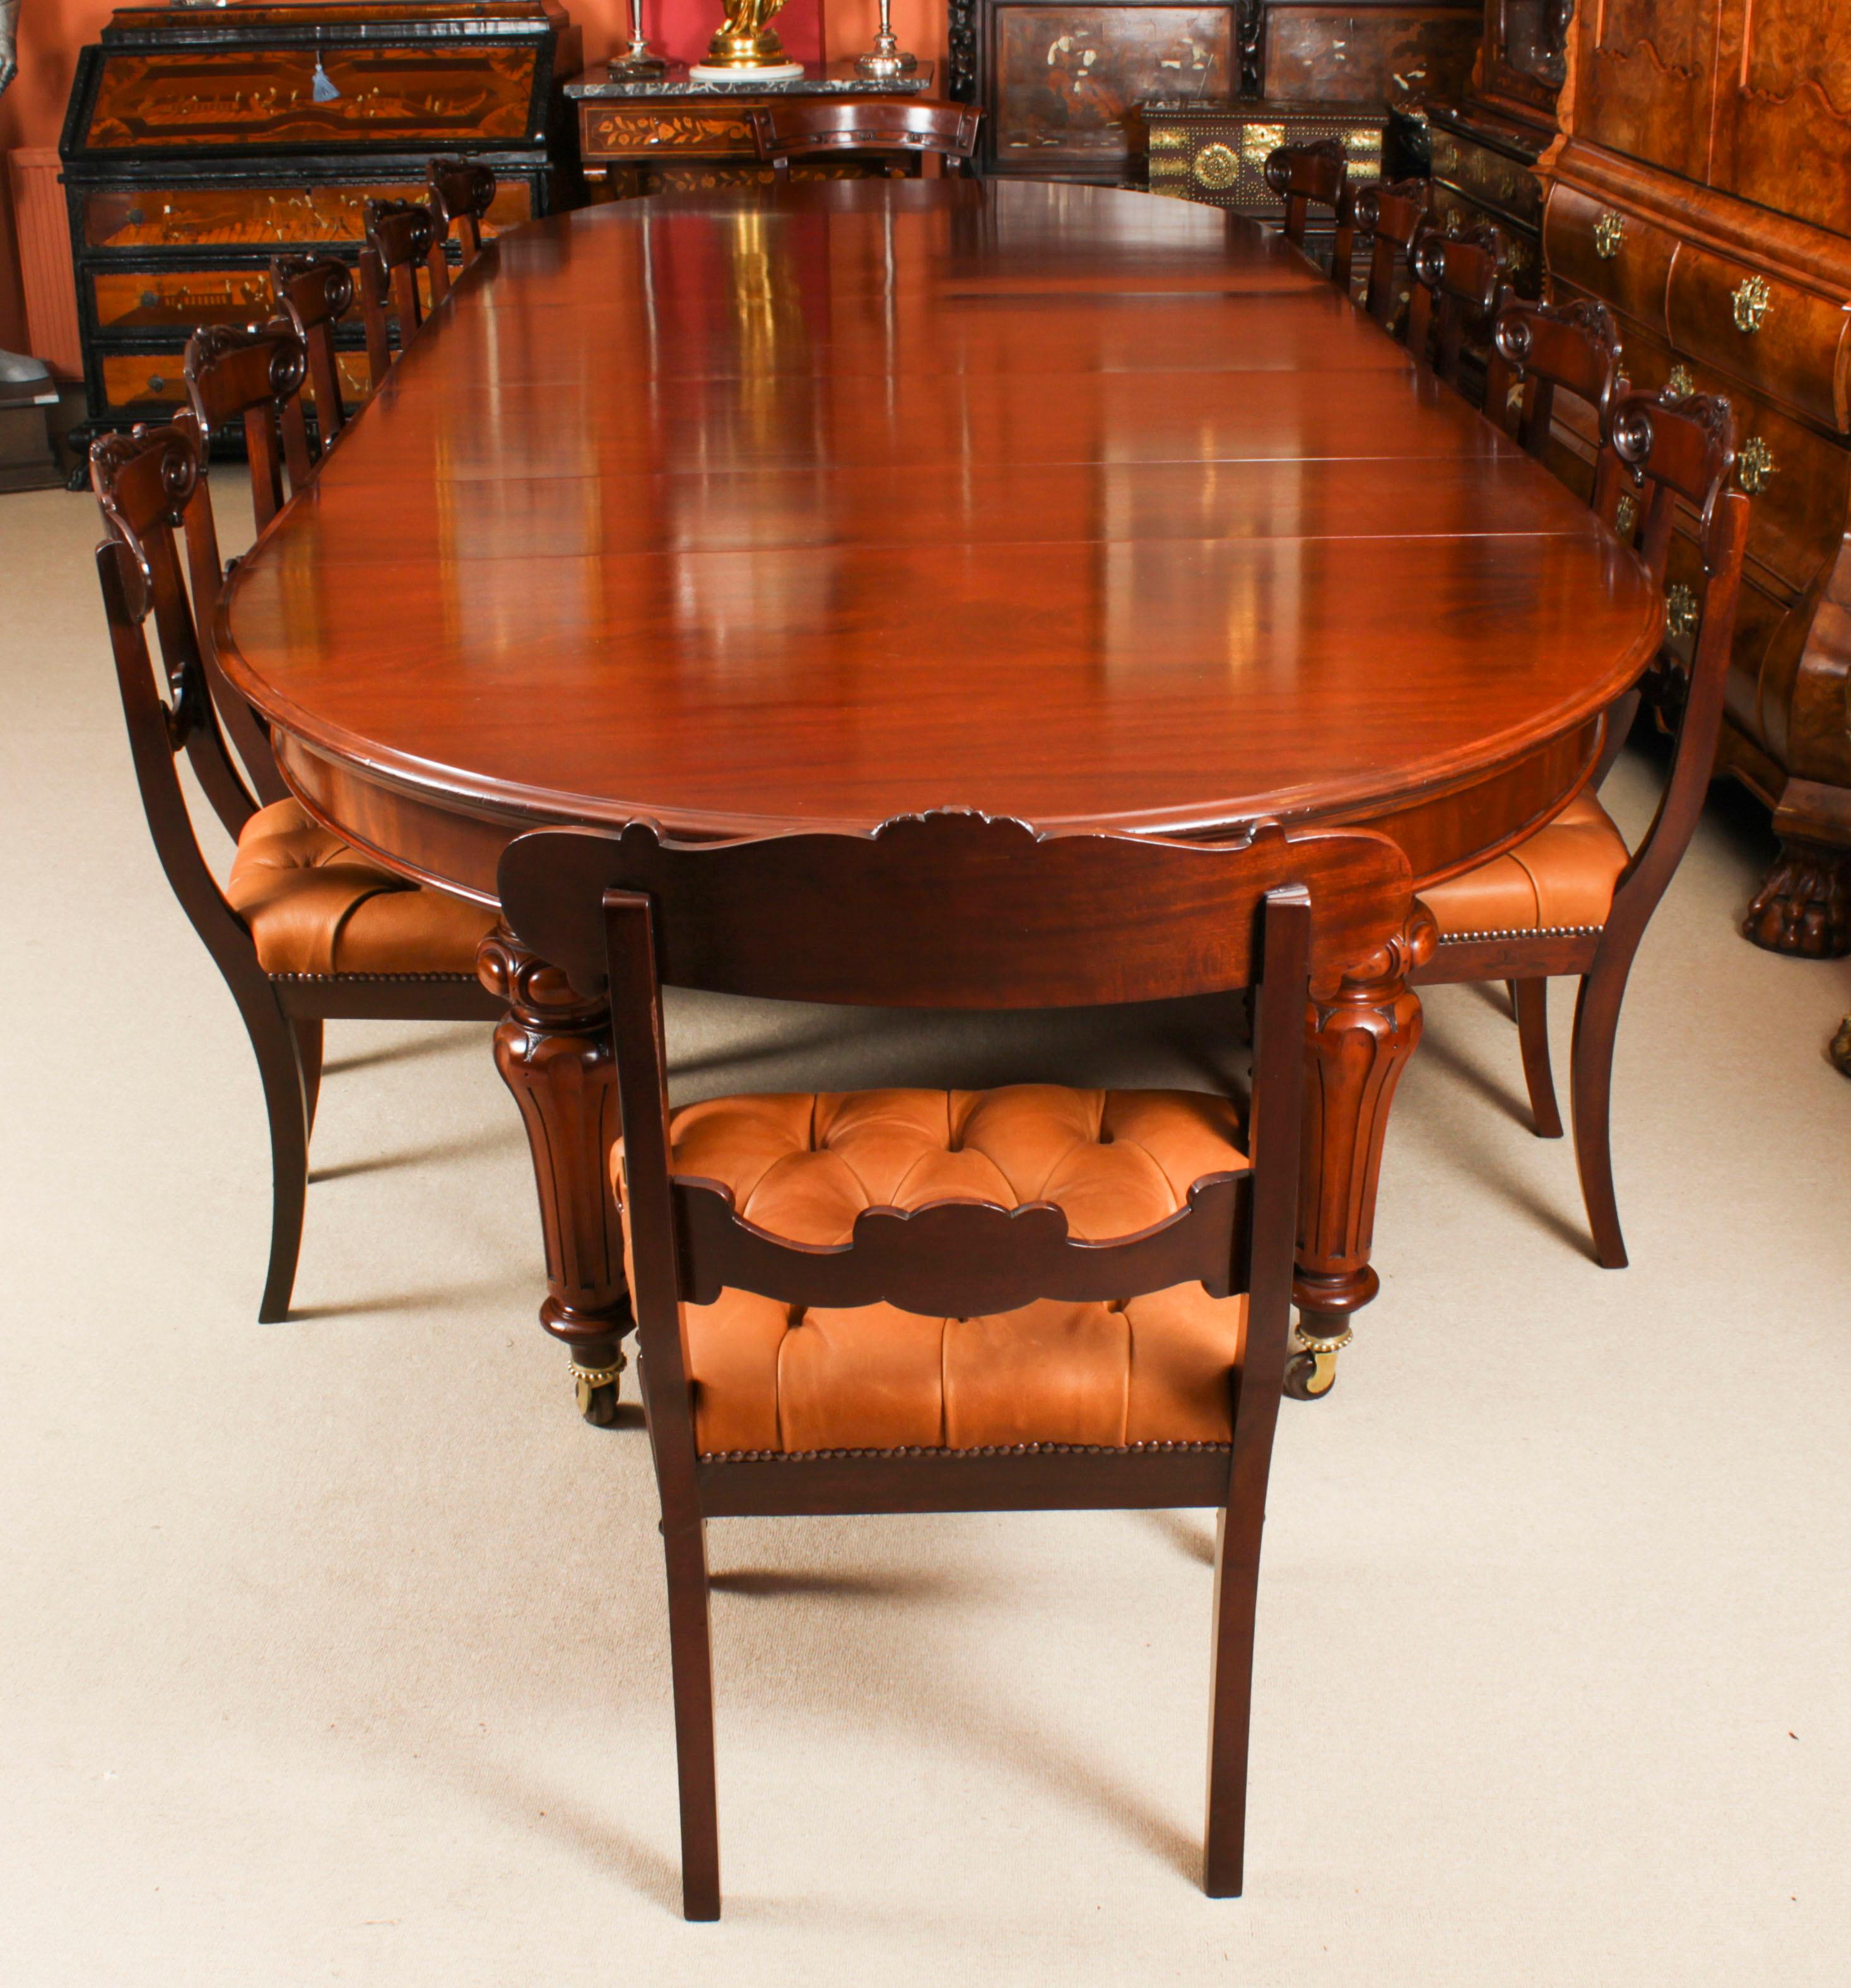 This is a fabulous large antique William IV oval ended flame mahogany extending dining table with a stunning set of twelve William IV  dining chairs, all circa 1830 in date. 

The table has four original leaves, can comfortably seat twelve and has